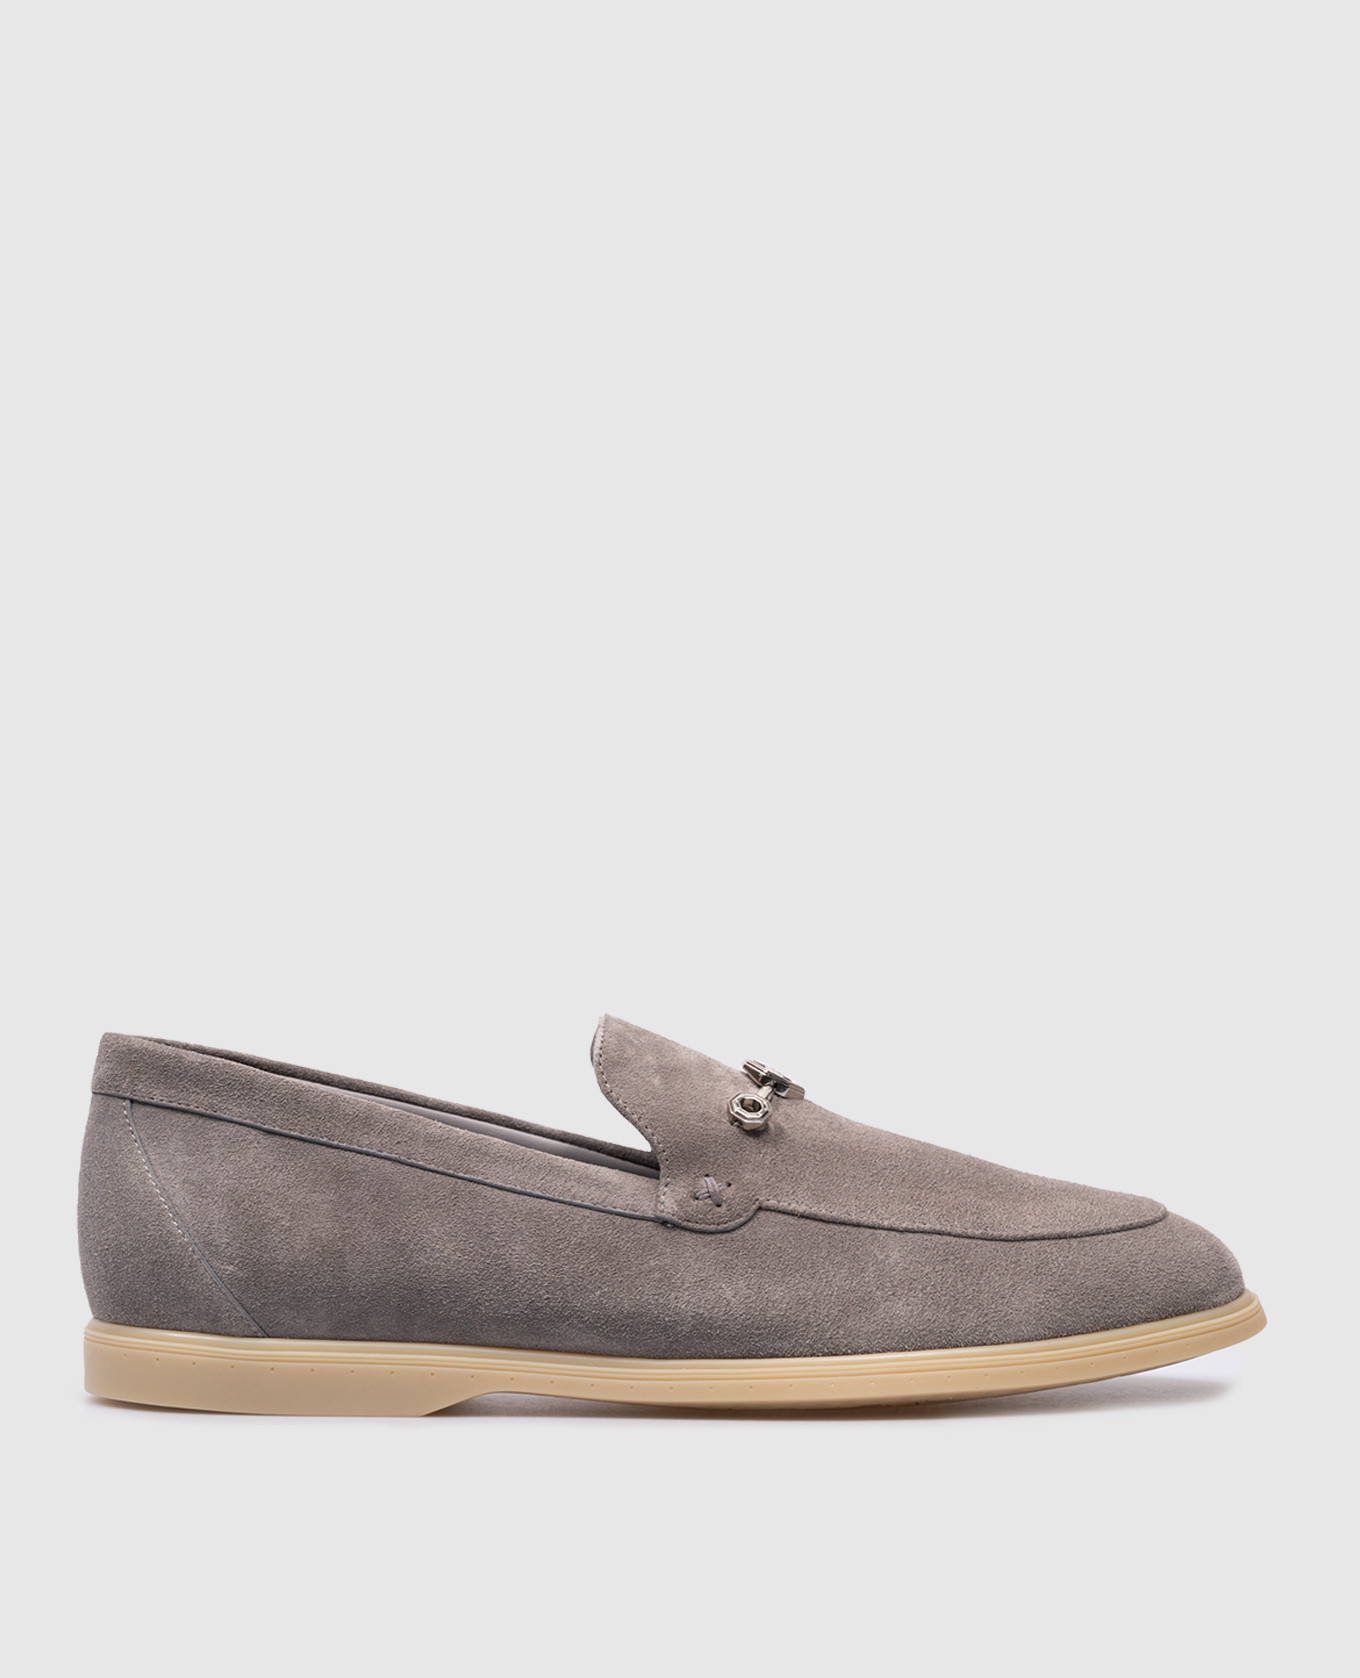 Gray suede loafers with metallic eagle head logo